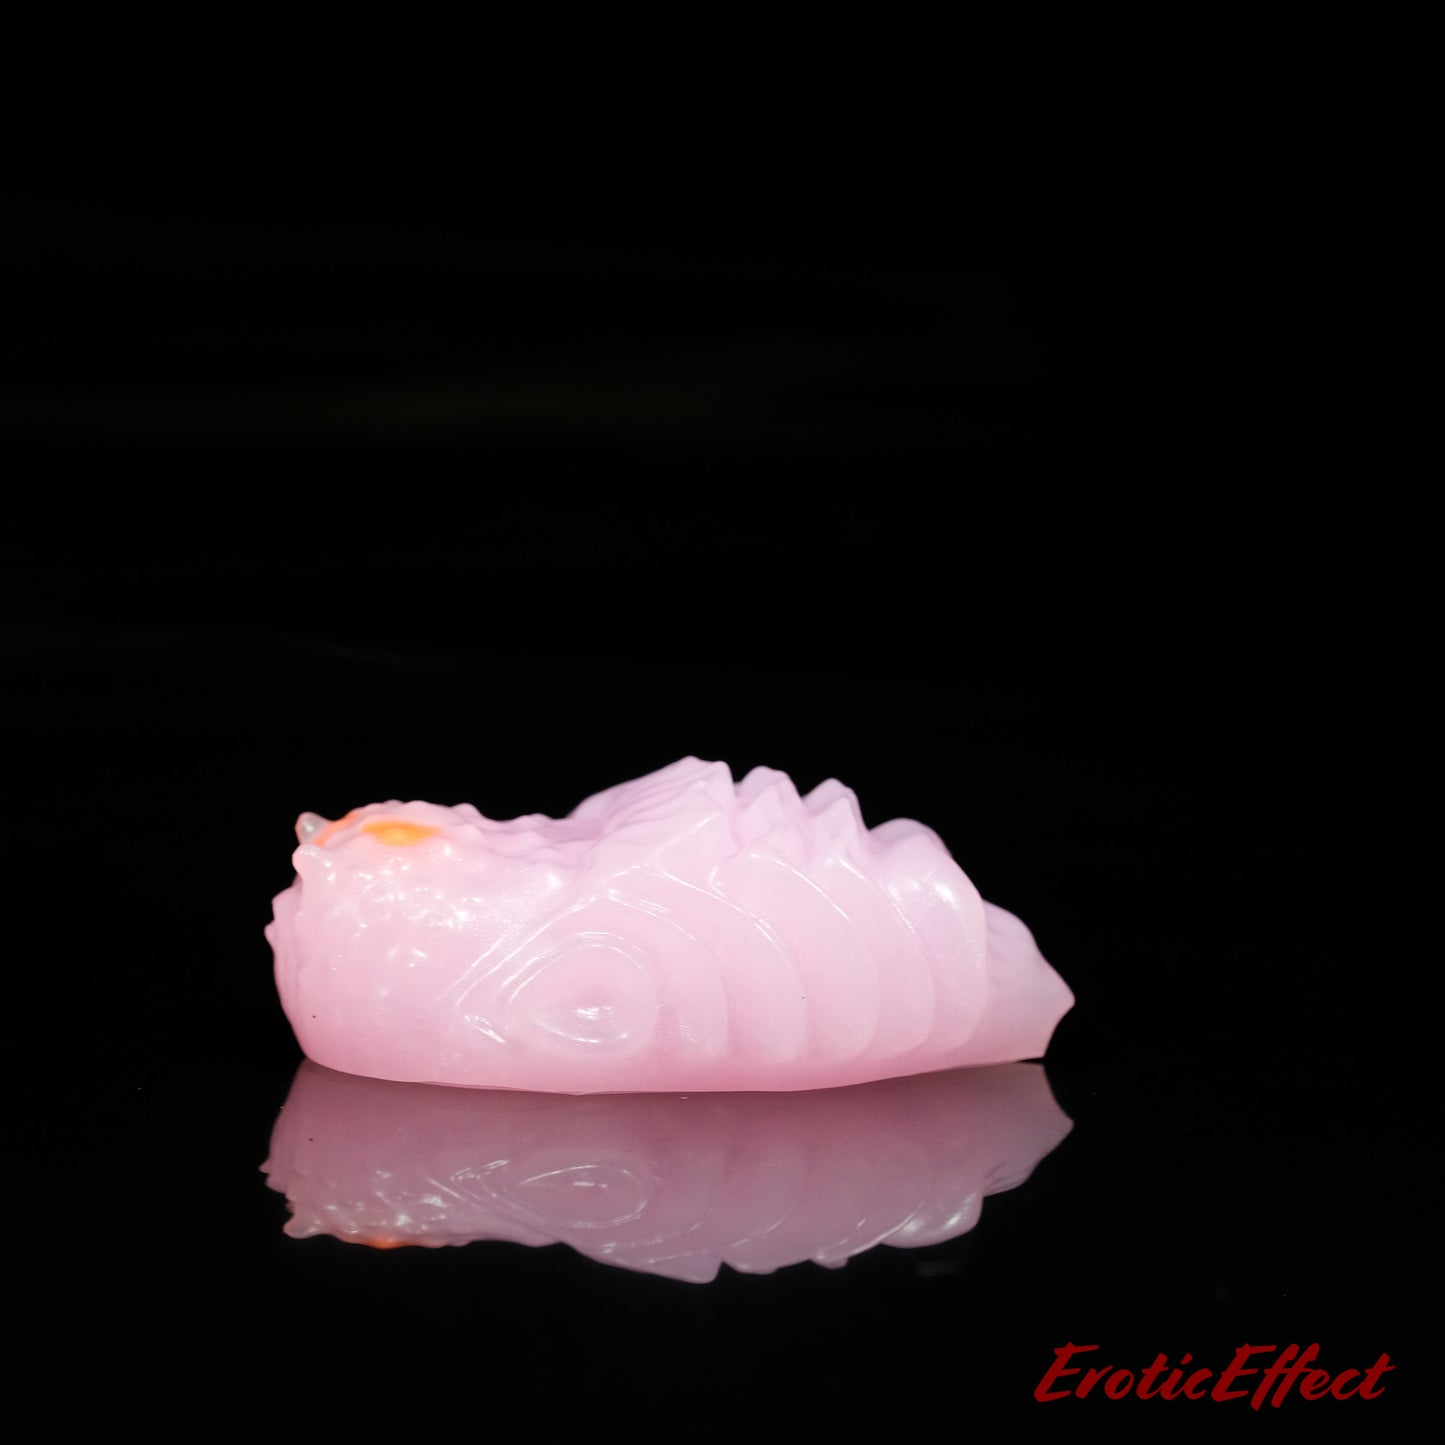 Edgar Silicone Grindable/Squishy - NC Soft - Heart Inclusions